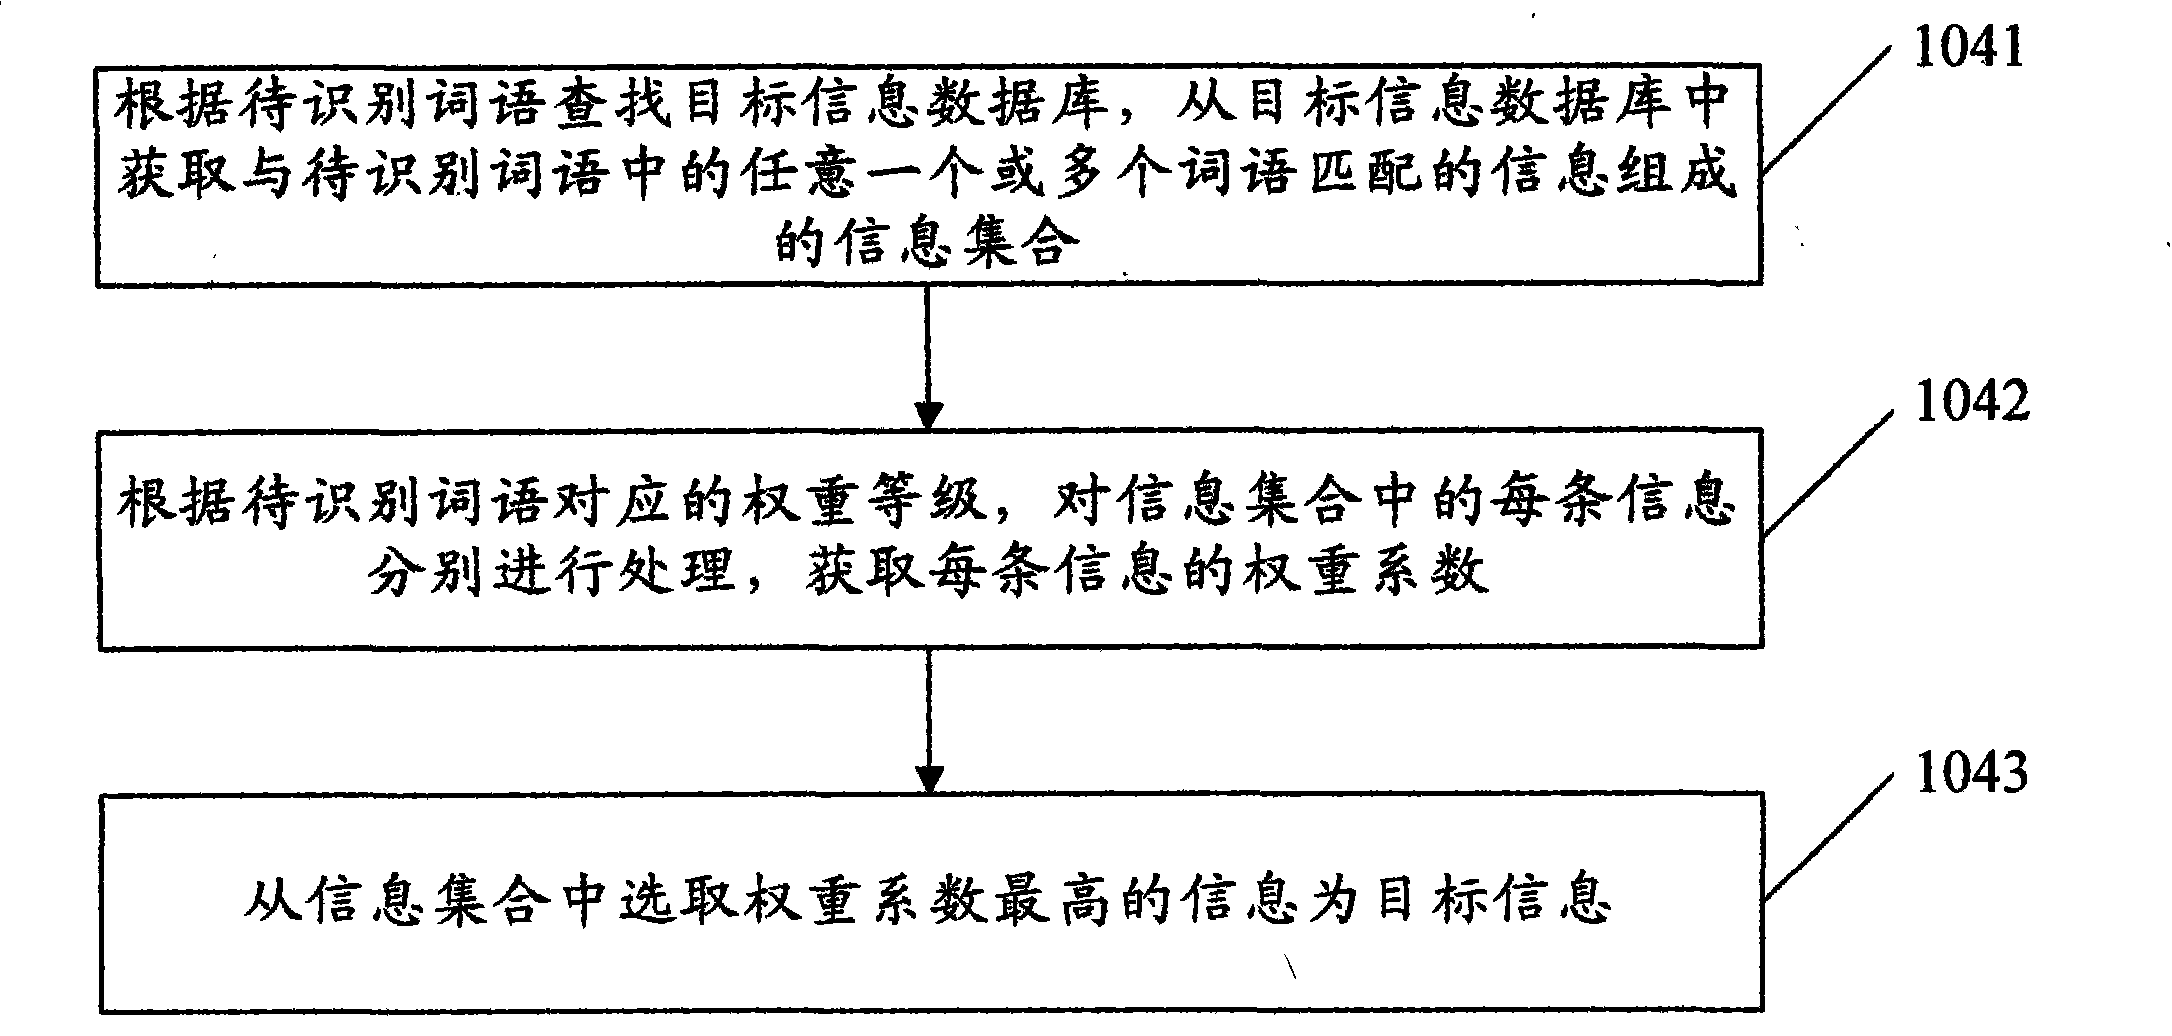 Method and device for recognizing natural speech